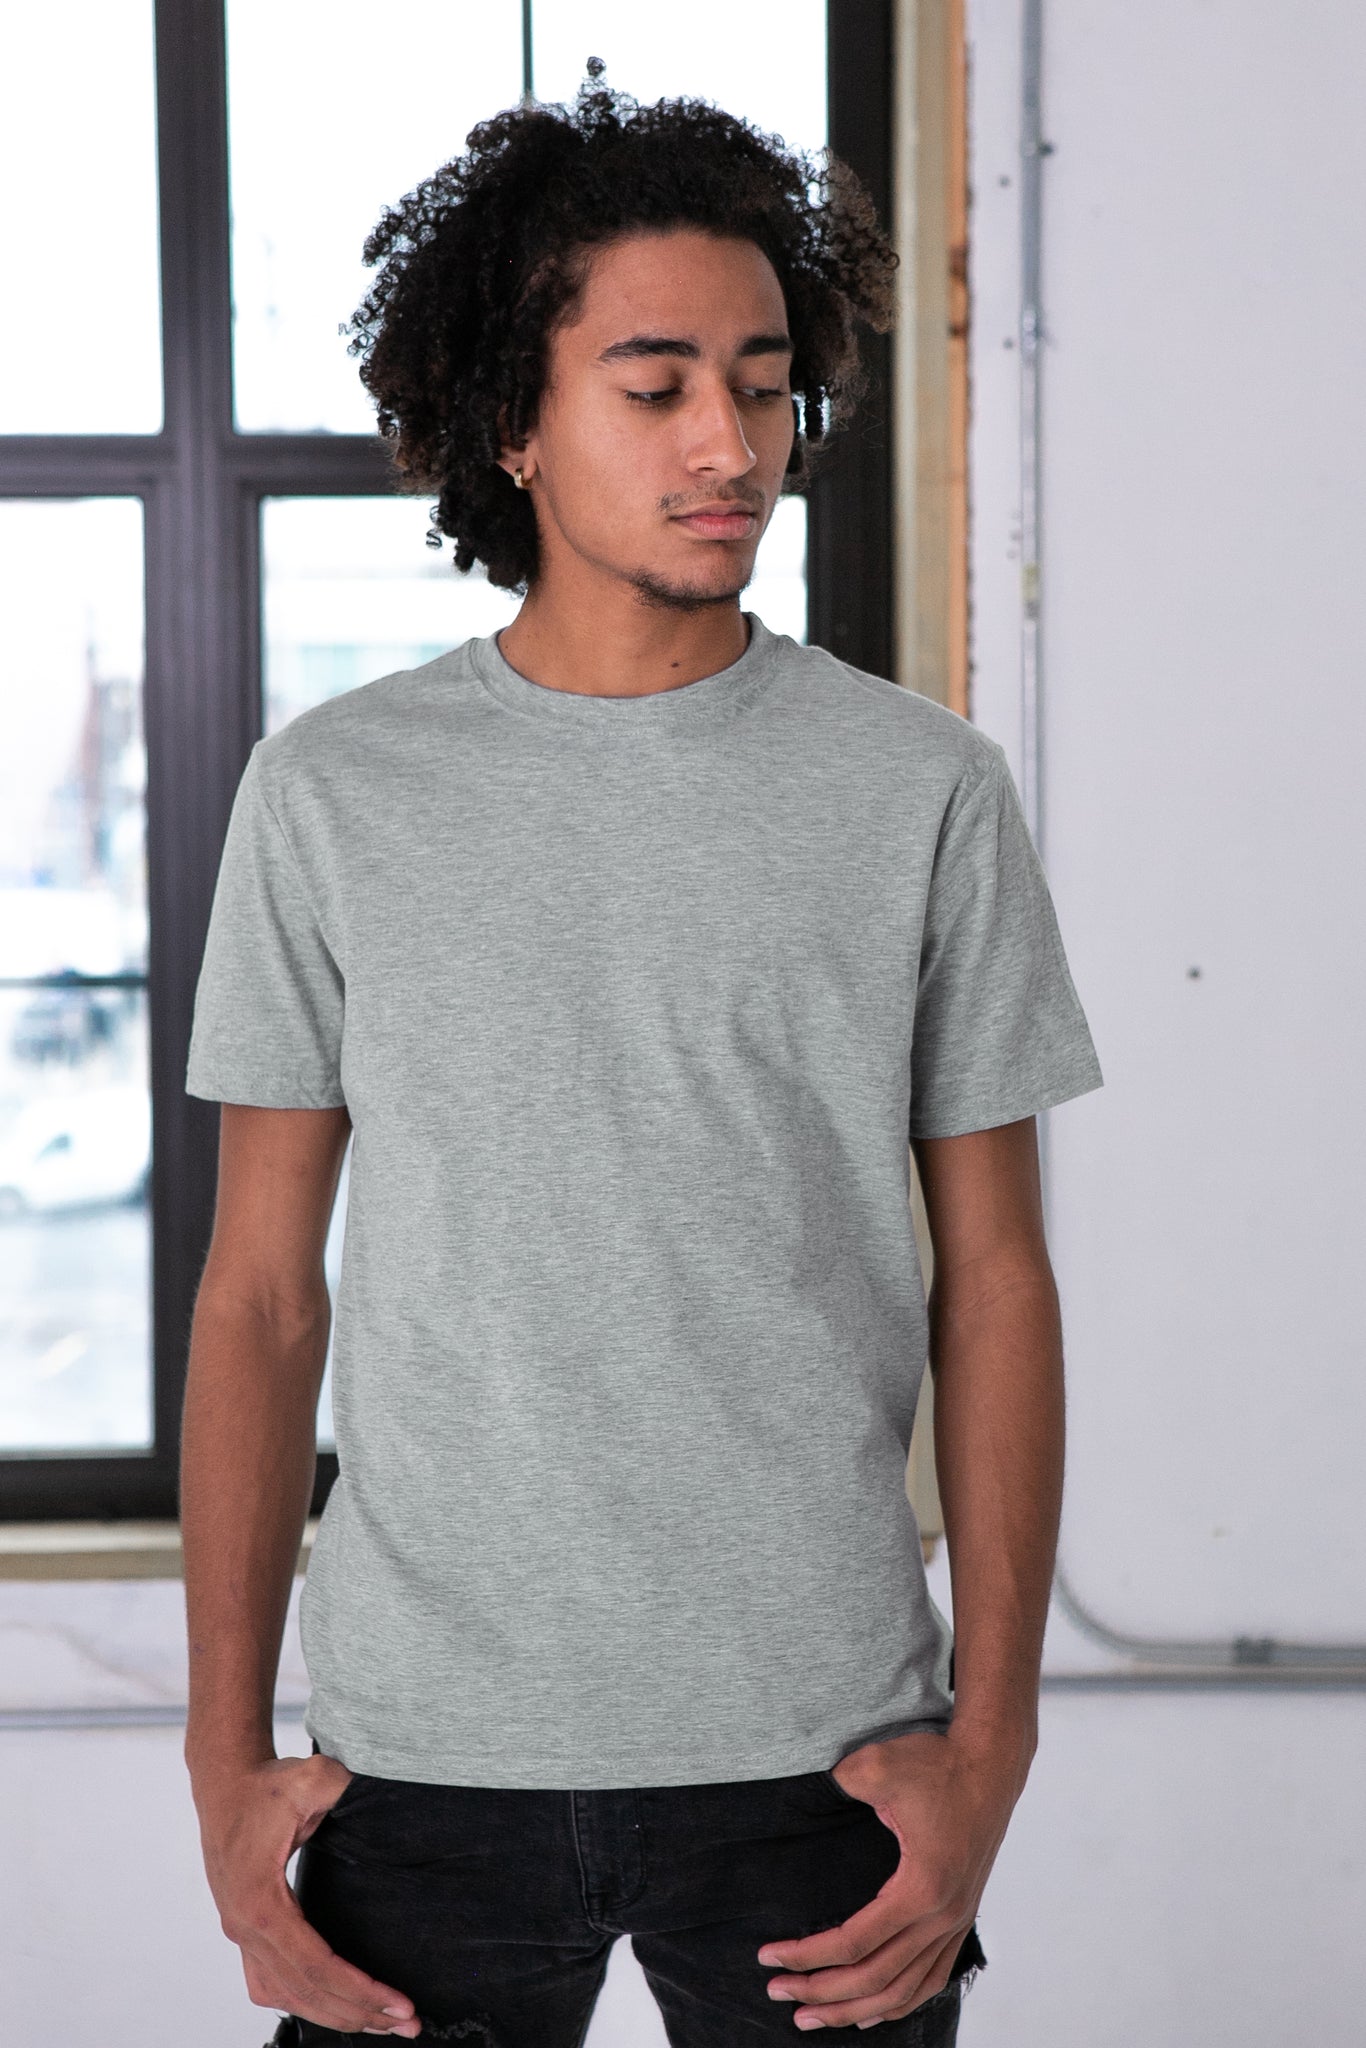 Male Model wearing GOEX Unisex and Men's Standard Cotton Tee in Oxford